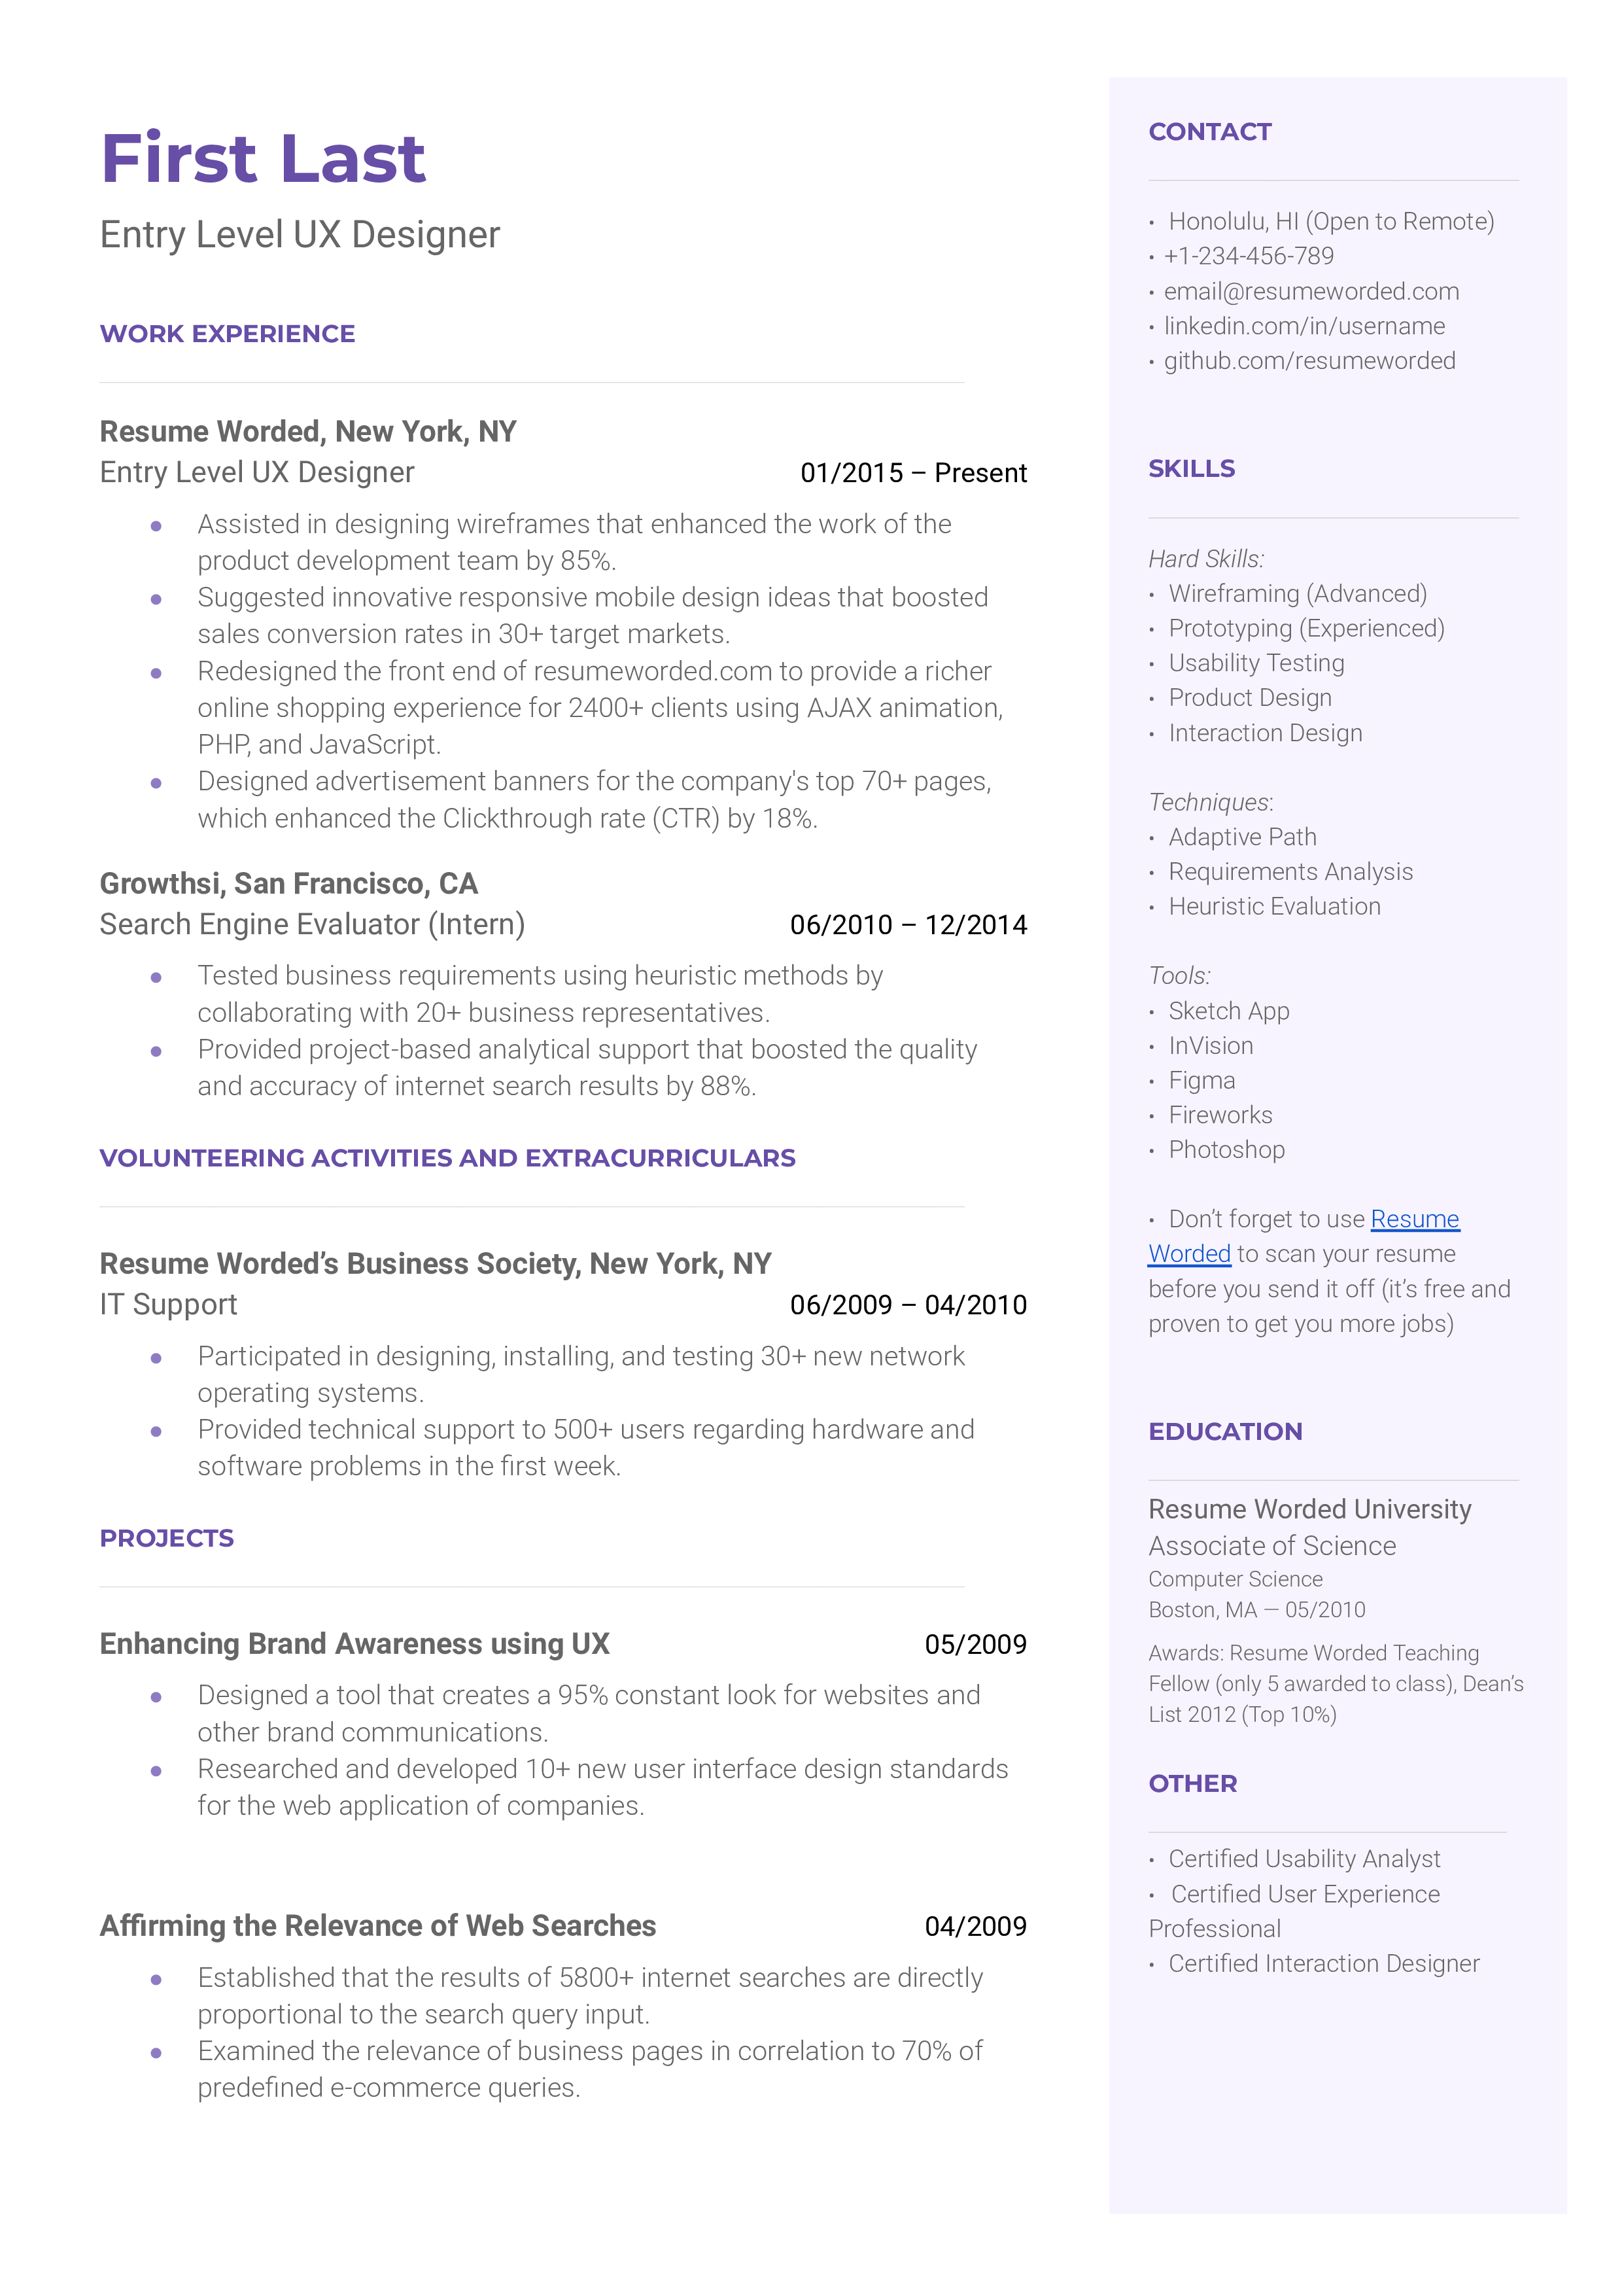 Entry-level UX designer resume sample with a focus on design process and relevant projects.